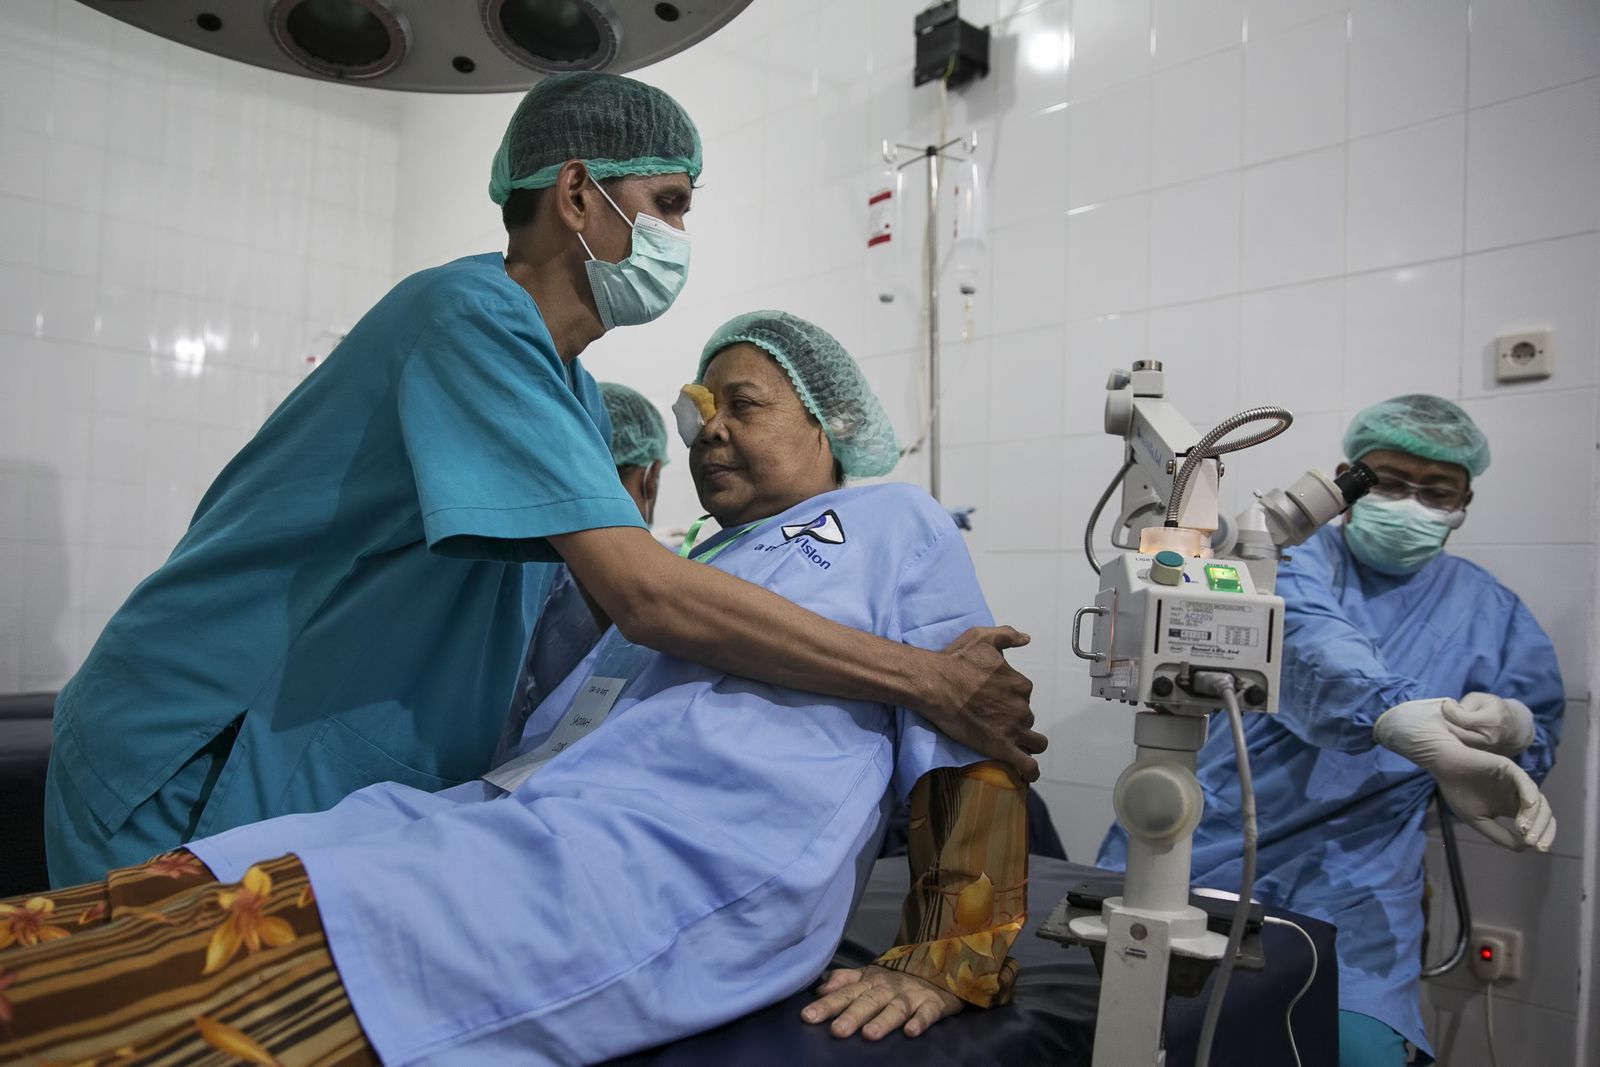 Cataract Surgery in Indonesia, March 2016